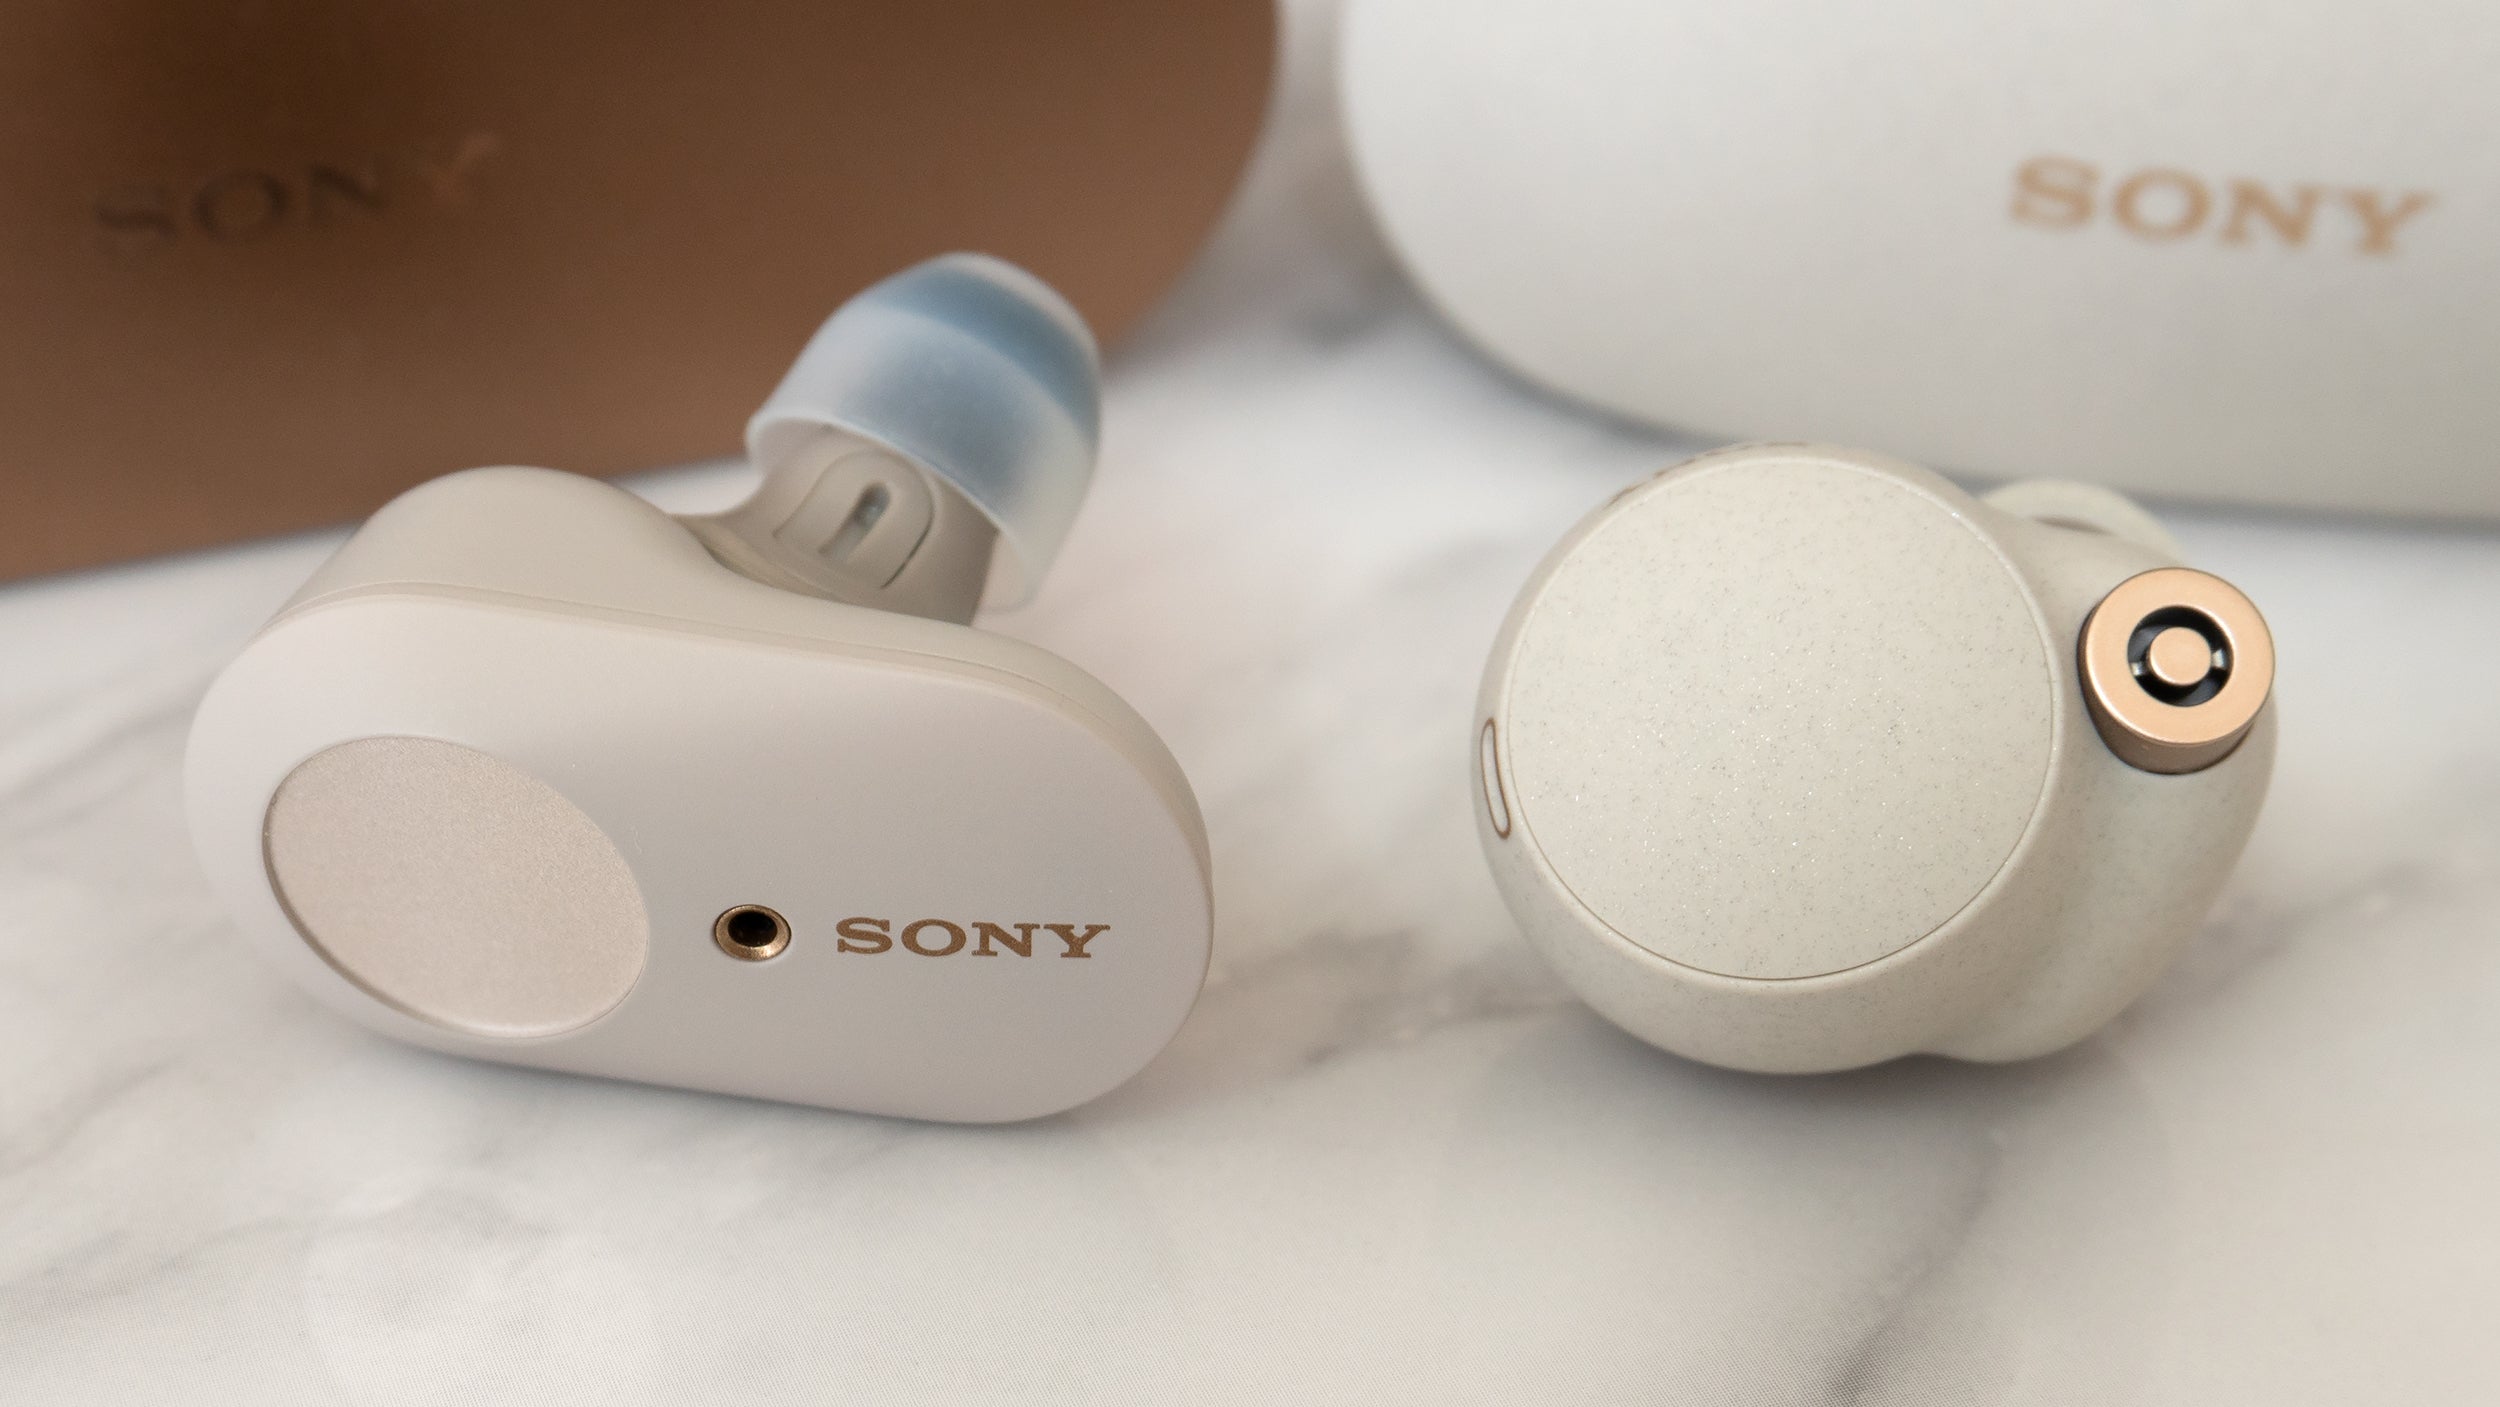 The Sony WF-1000XM4 buds (right) are smaller and lighter than the Sony WF-1000XM3s (left), but they're still quite a bit larger than most of the premium wireless earbud options out there. (Photo: Andrew Liszewski/Gizmodo)